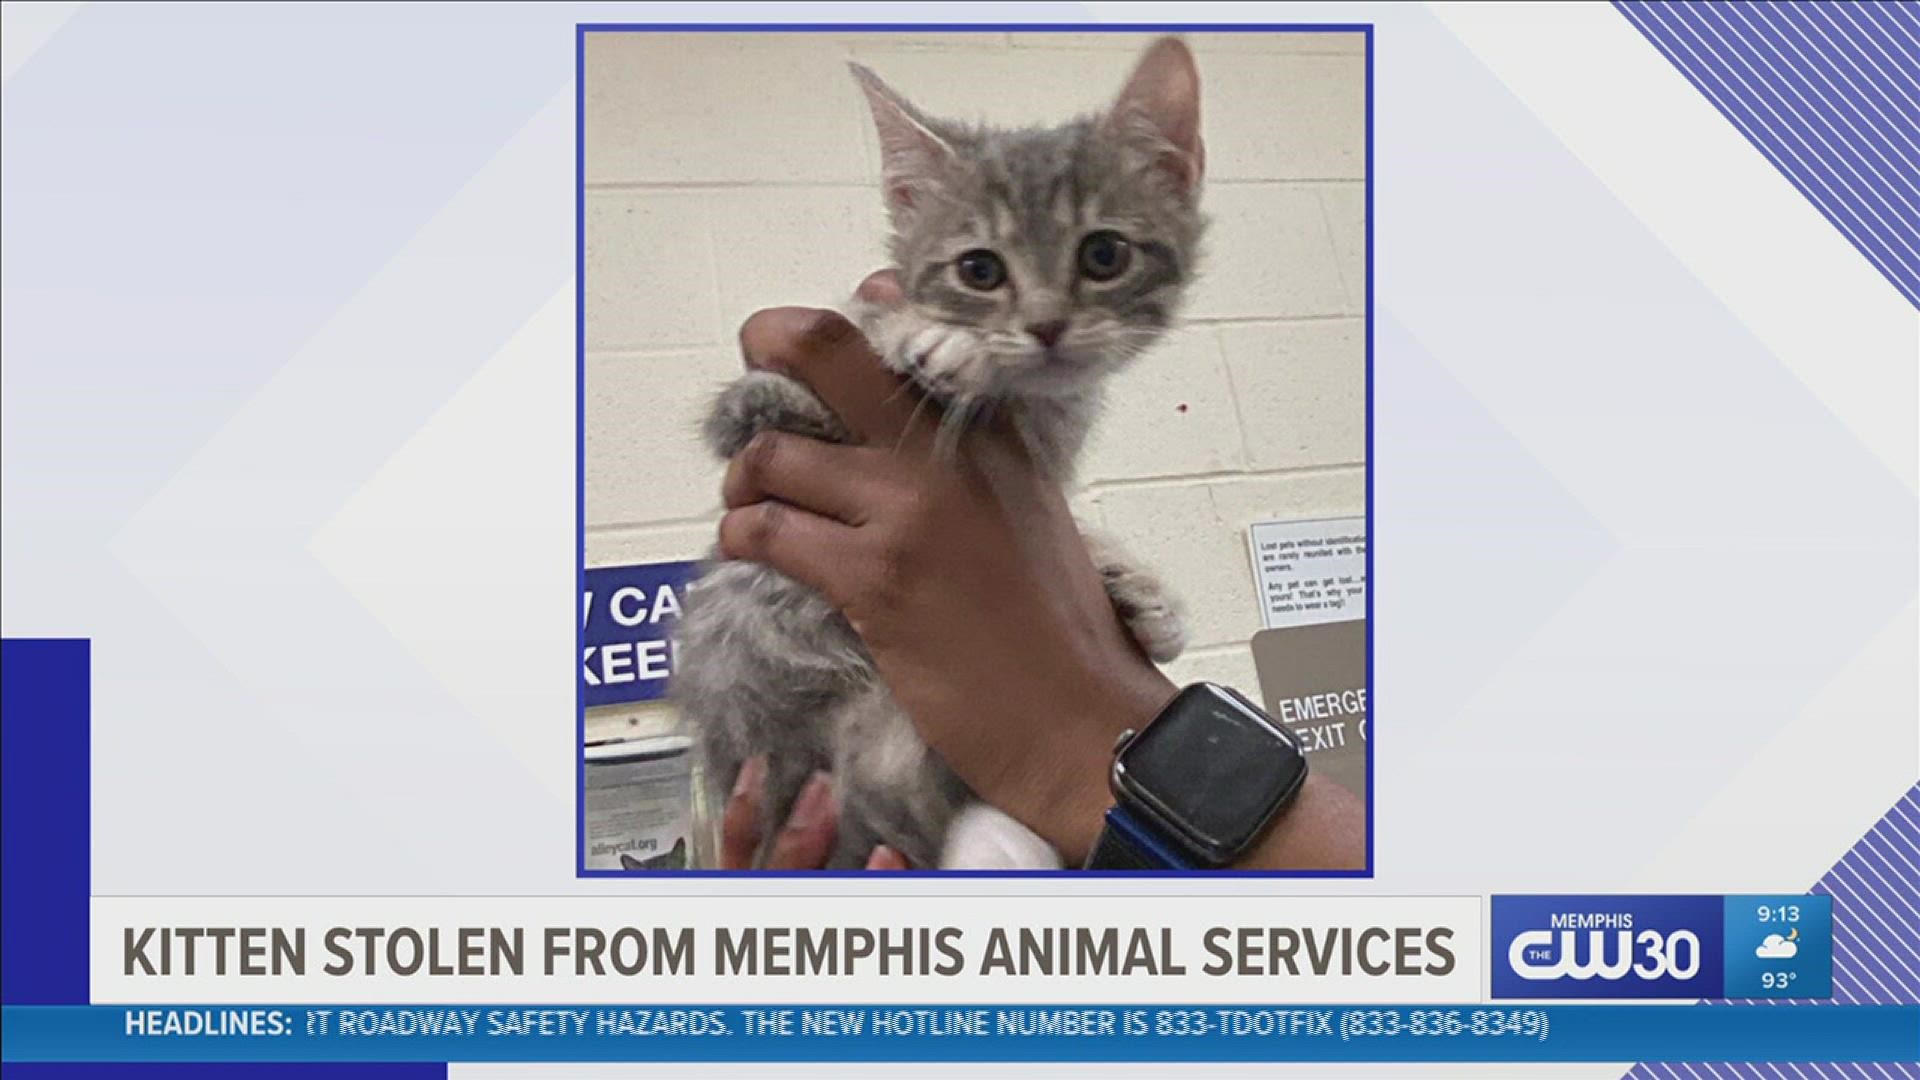 Memphis Animal Services said the two-month-old kitten had already been adopted, and was awaiting spay surgery when she was taken.